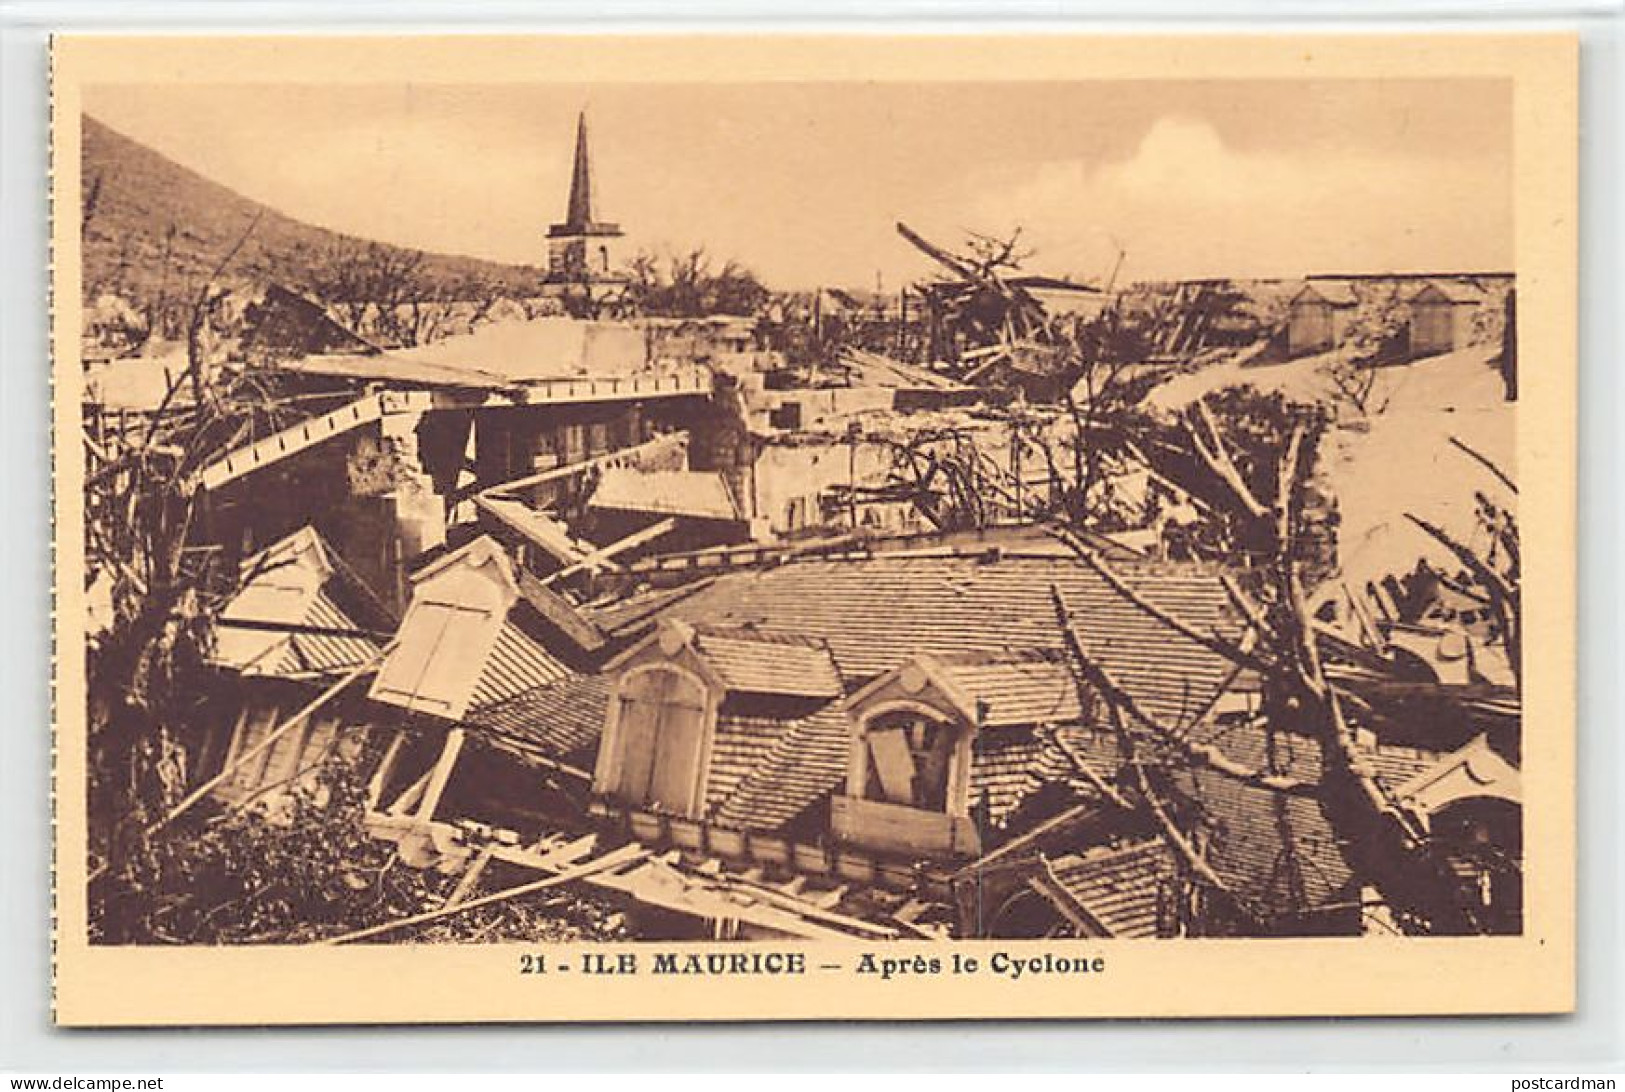 Mauritius - PORT-LOUIS - After The Cyclone - Publ. Spiritus 21 - Maurice